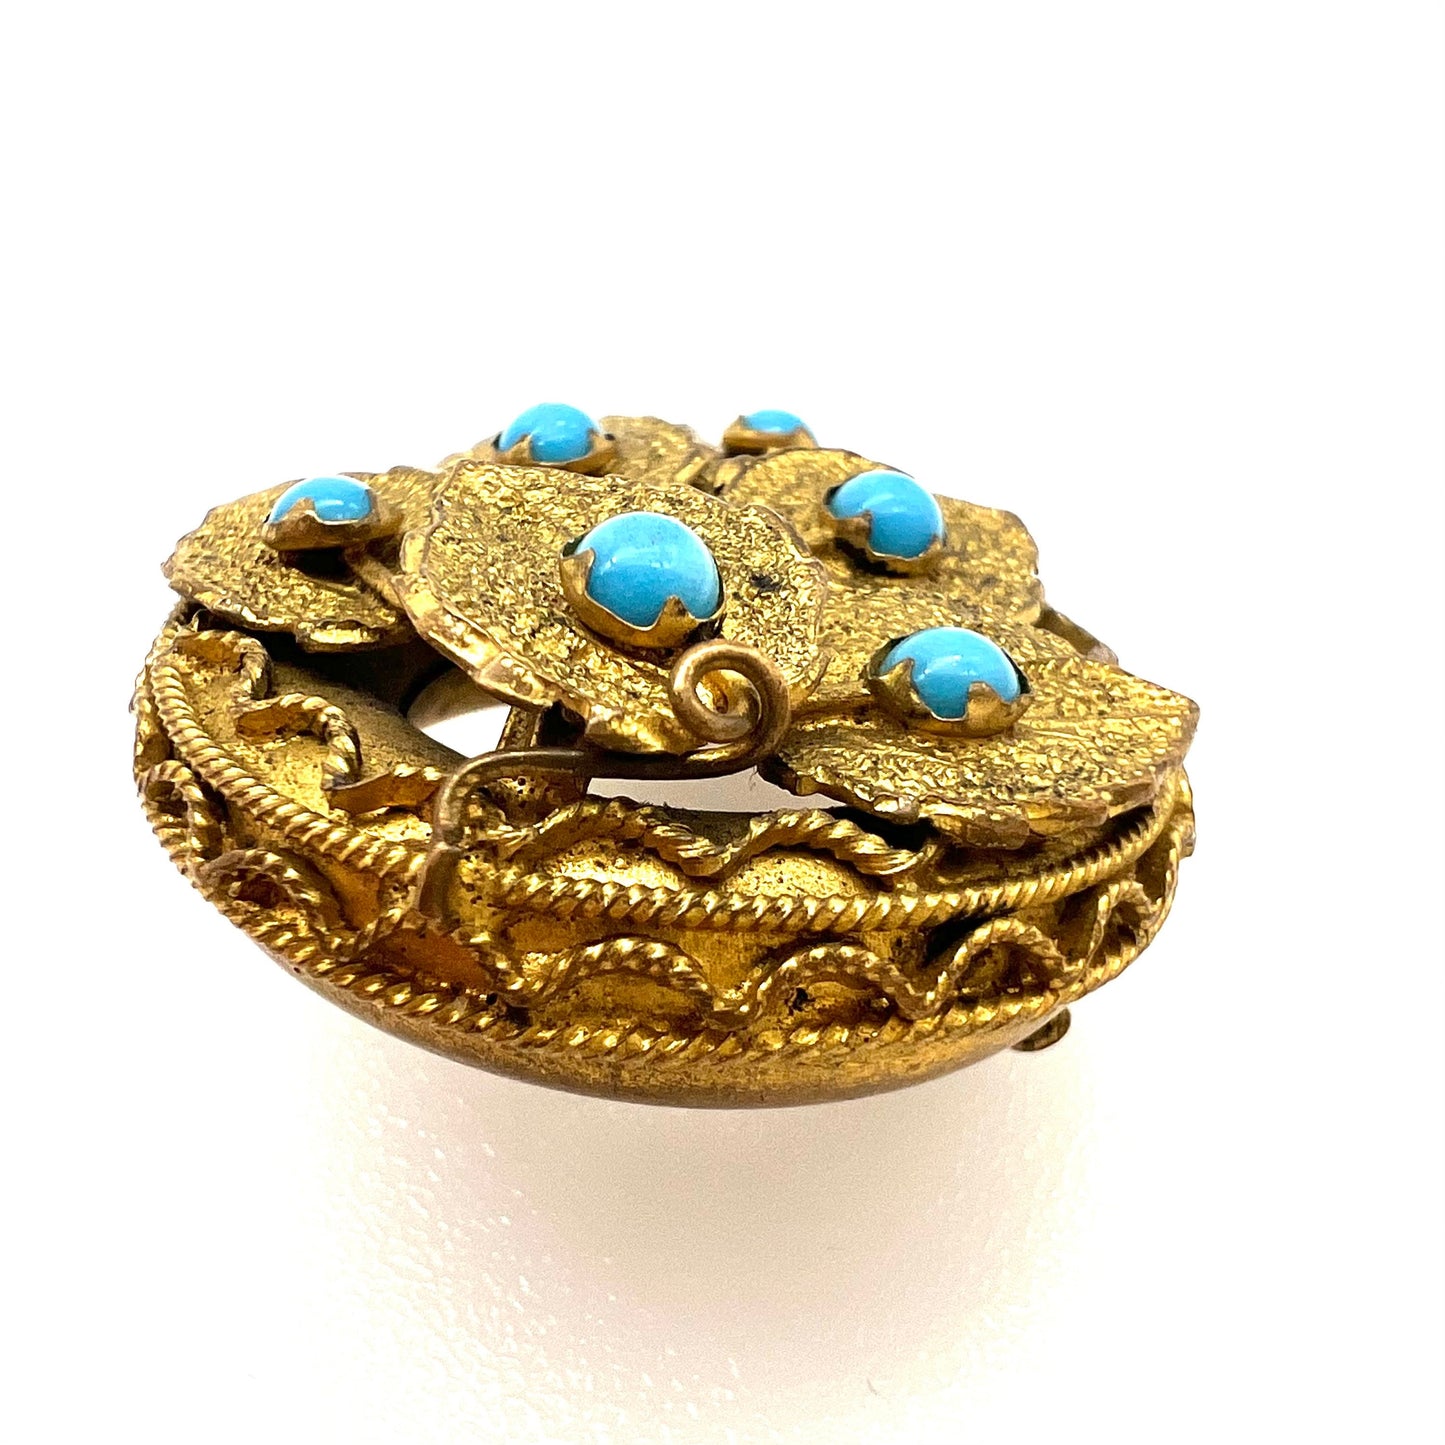 Antique Victorian Etruscan Revival Faux Turquoise and Leaf Gold Tone Brooch